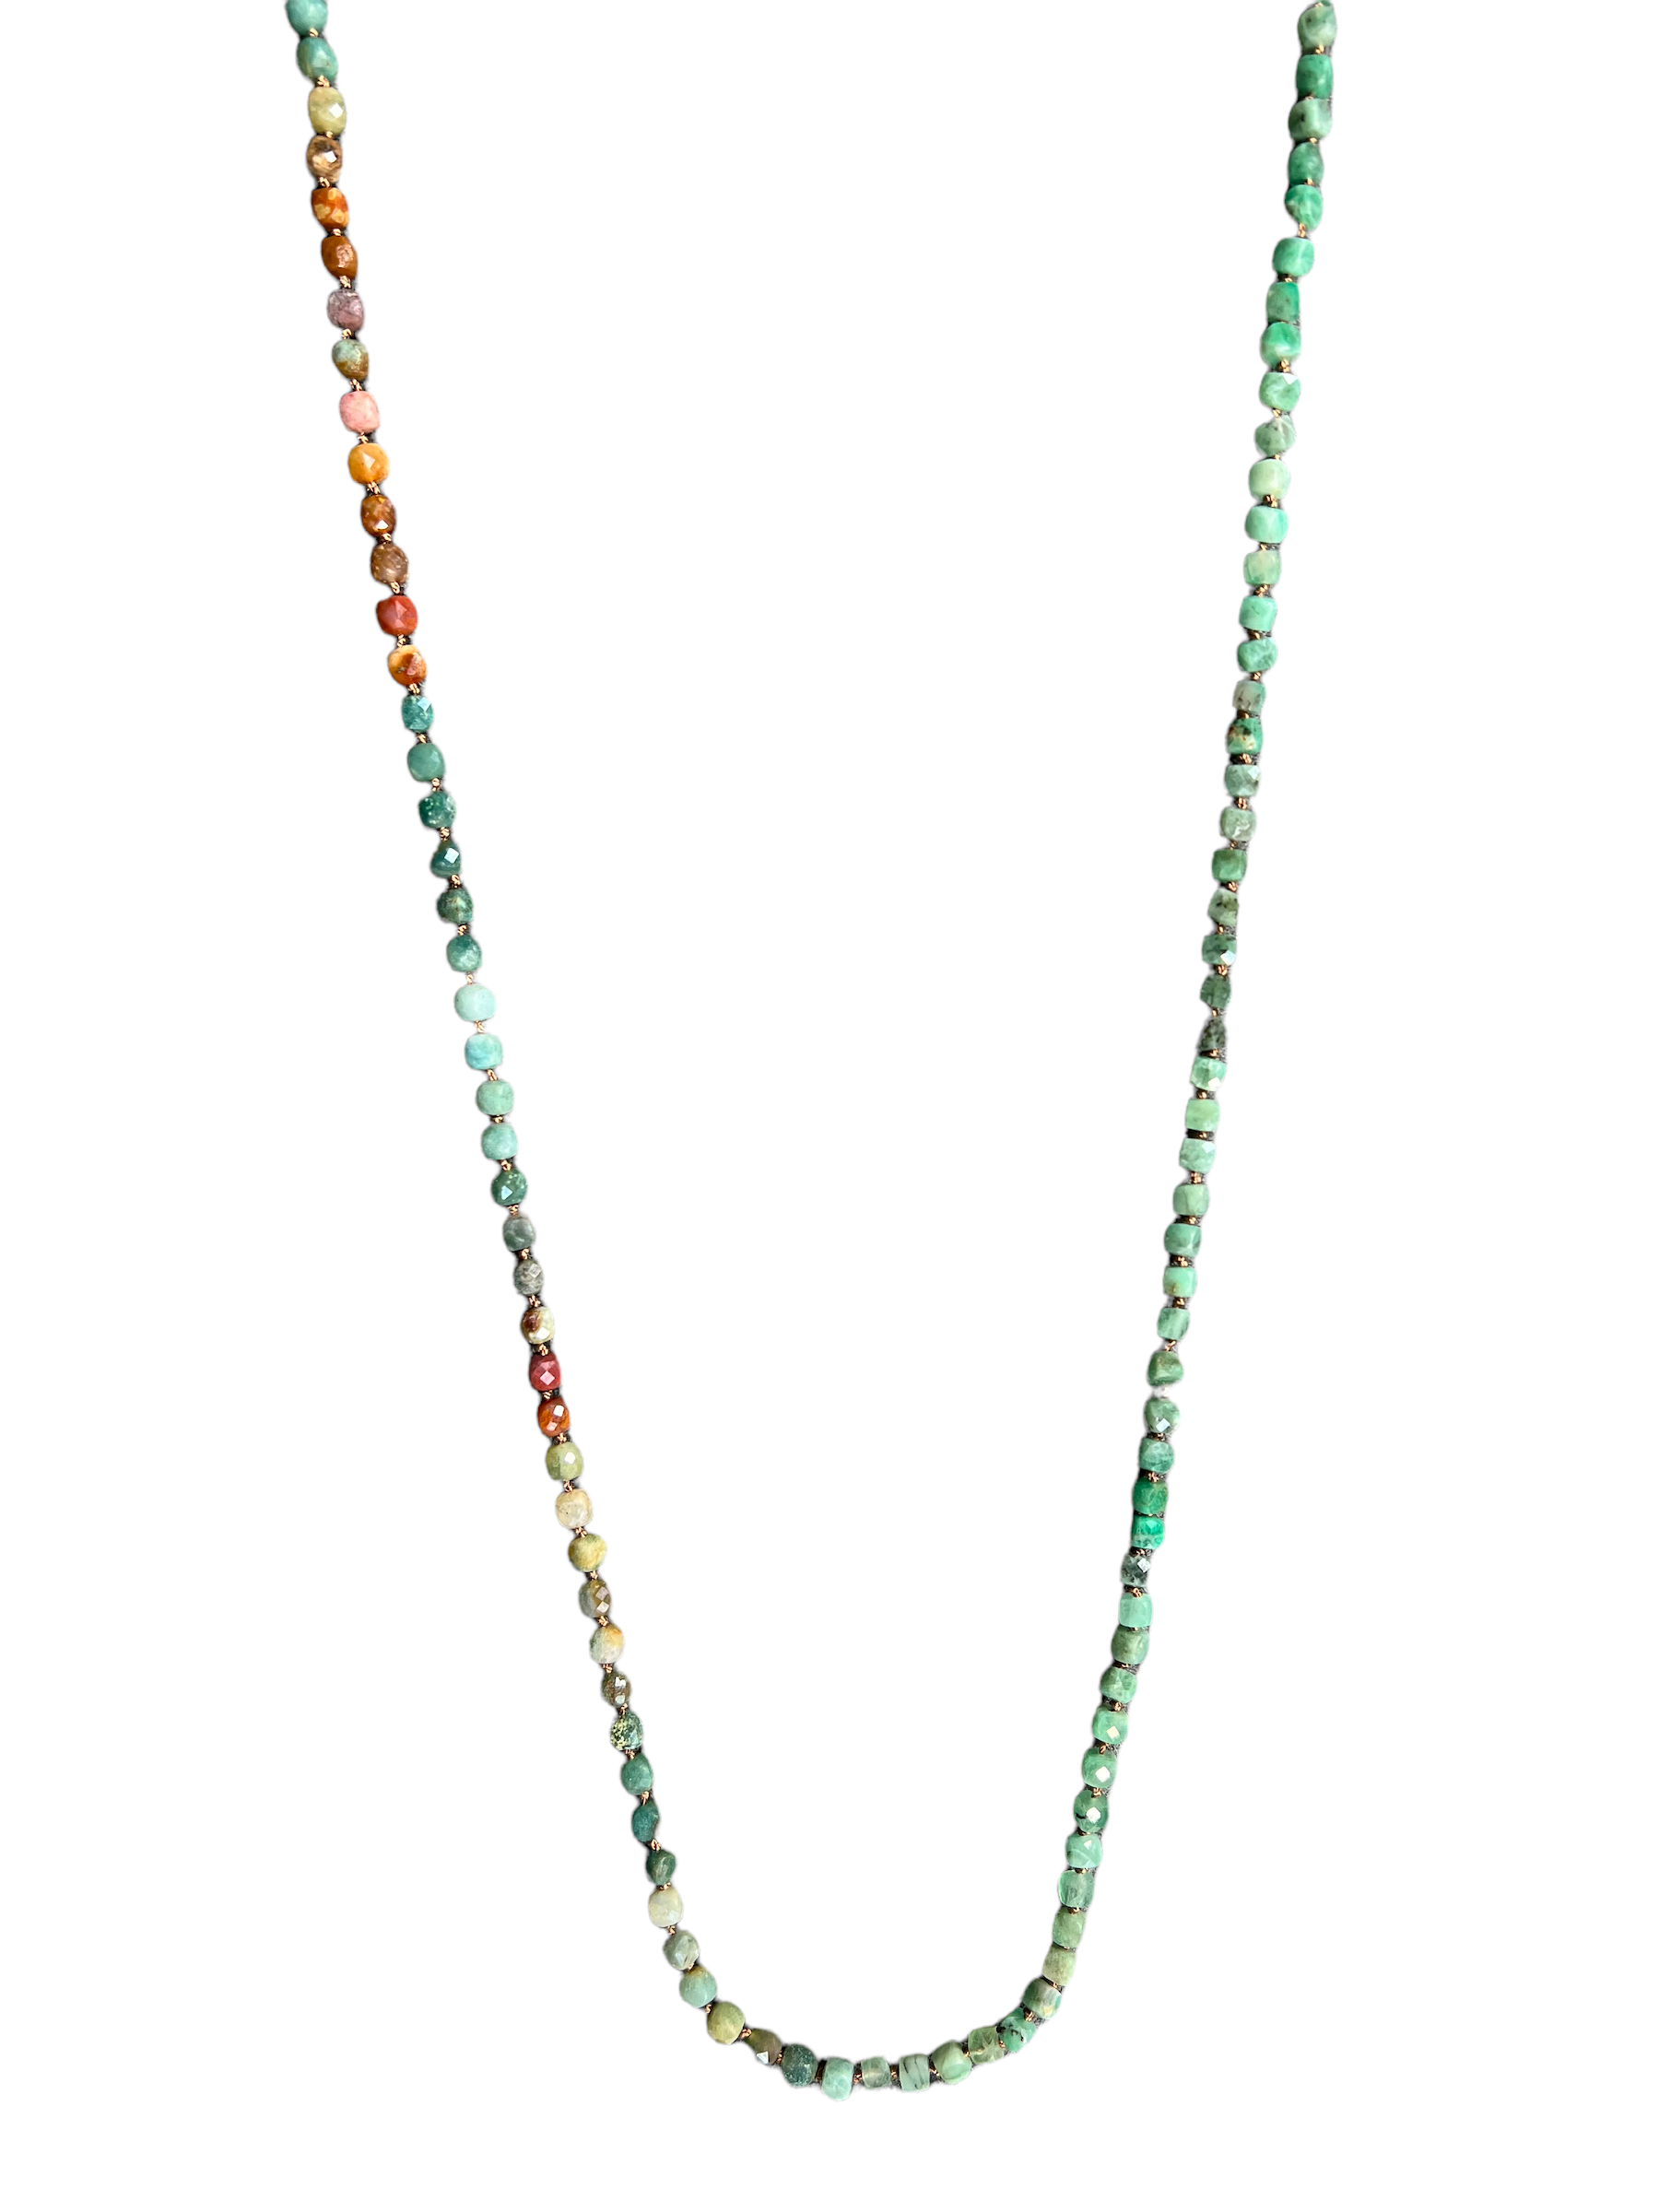 FEATHERED SOUL NECKLACE - MULTICOLORED EMERALDS ON BEIGE SILK